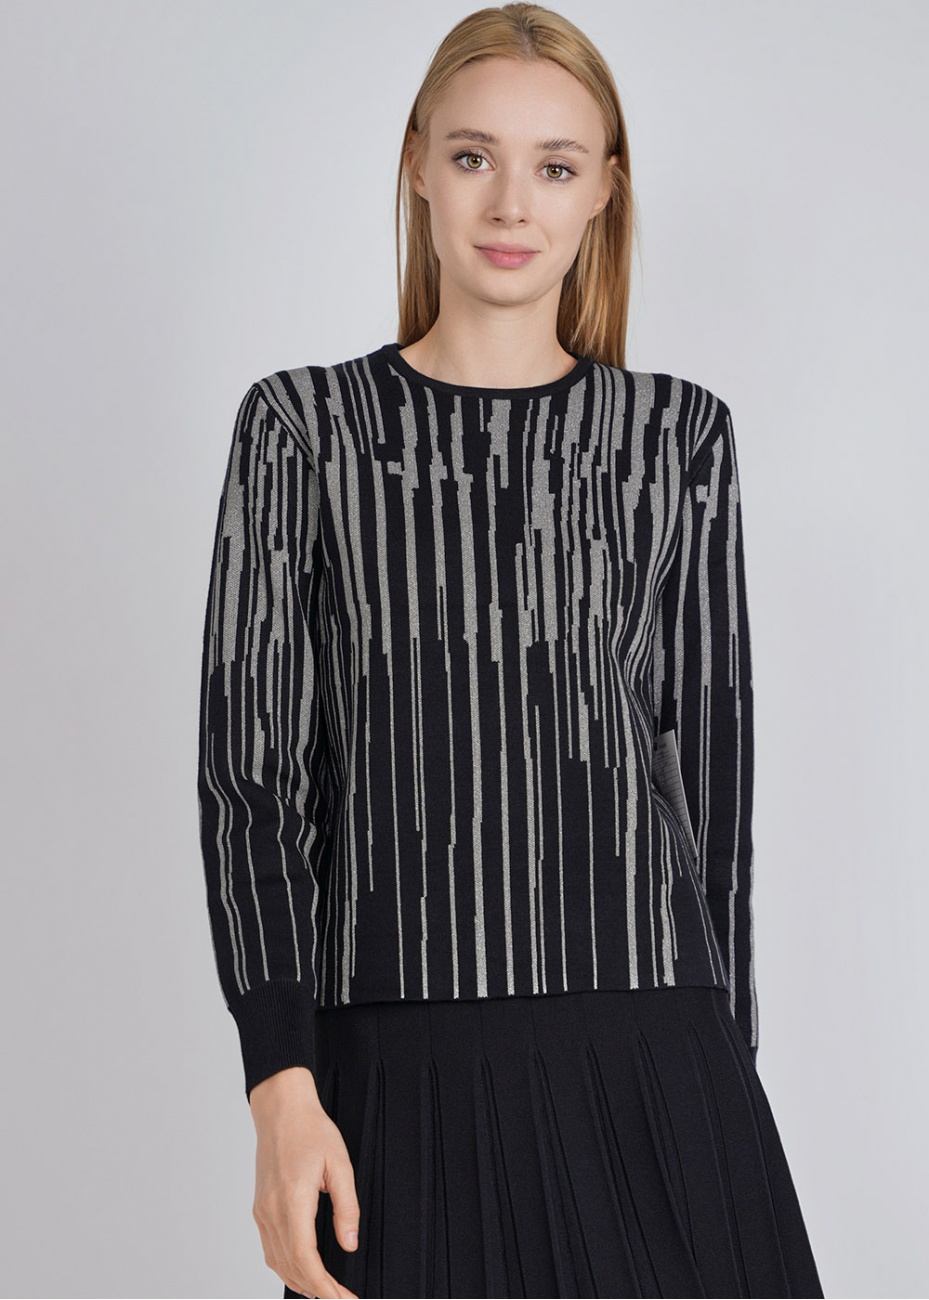 Silver Lined Dreams: Black Knit Top